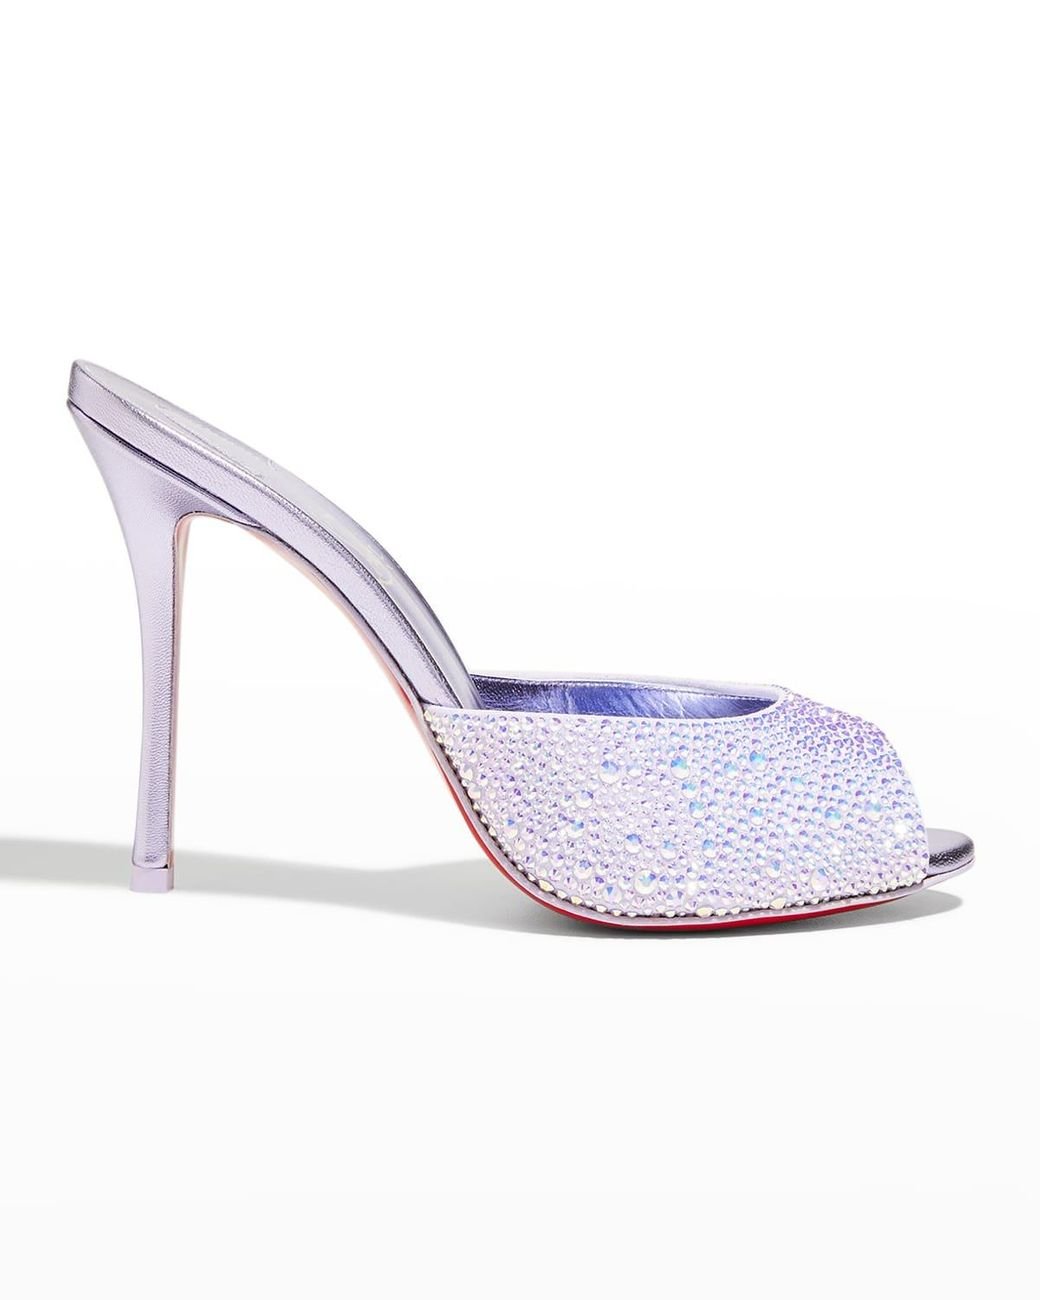 Christian Louboutin Me Dolly Strass Red Sole Slide Sandals in